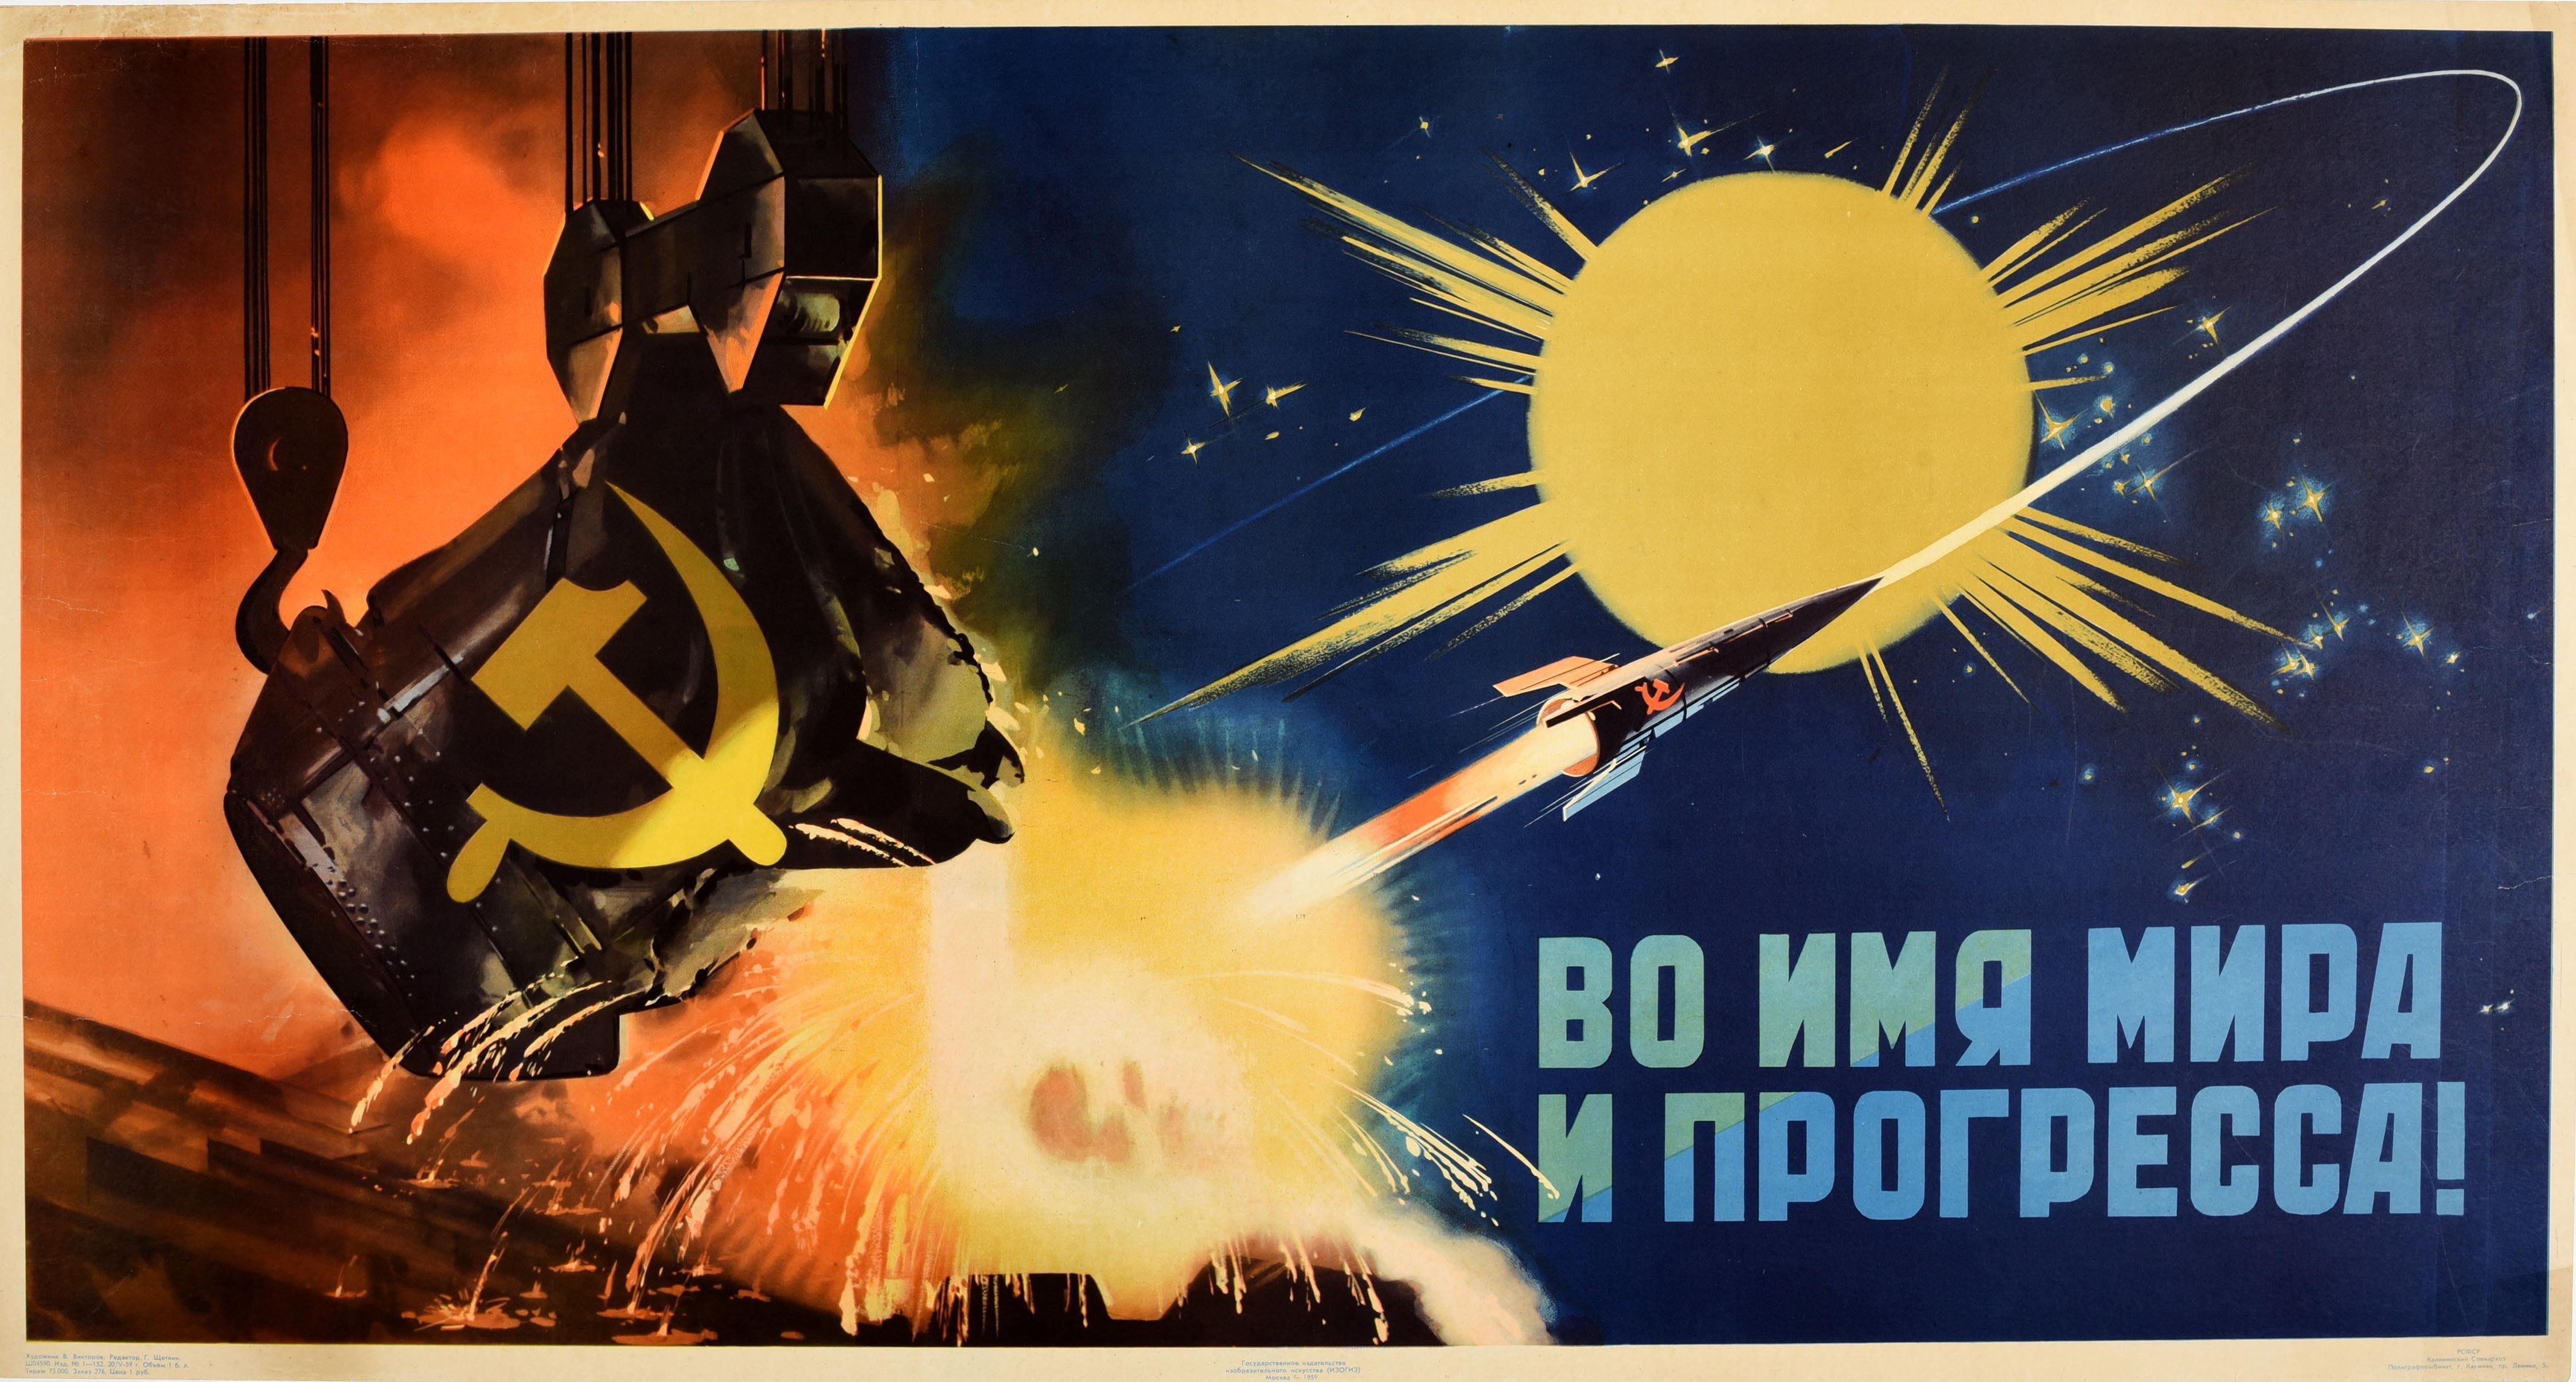 Russian Original Vintage Soviet Poster In The Name Of Peace And Progress USSR Space Race